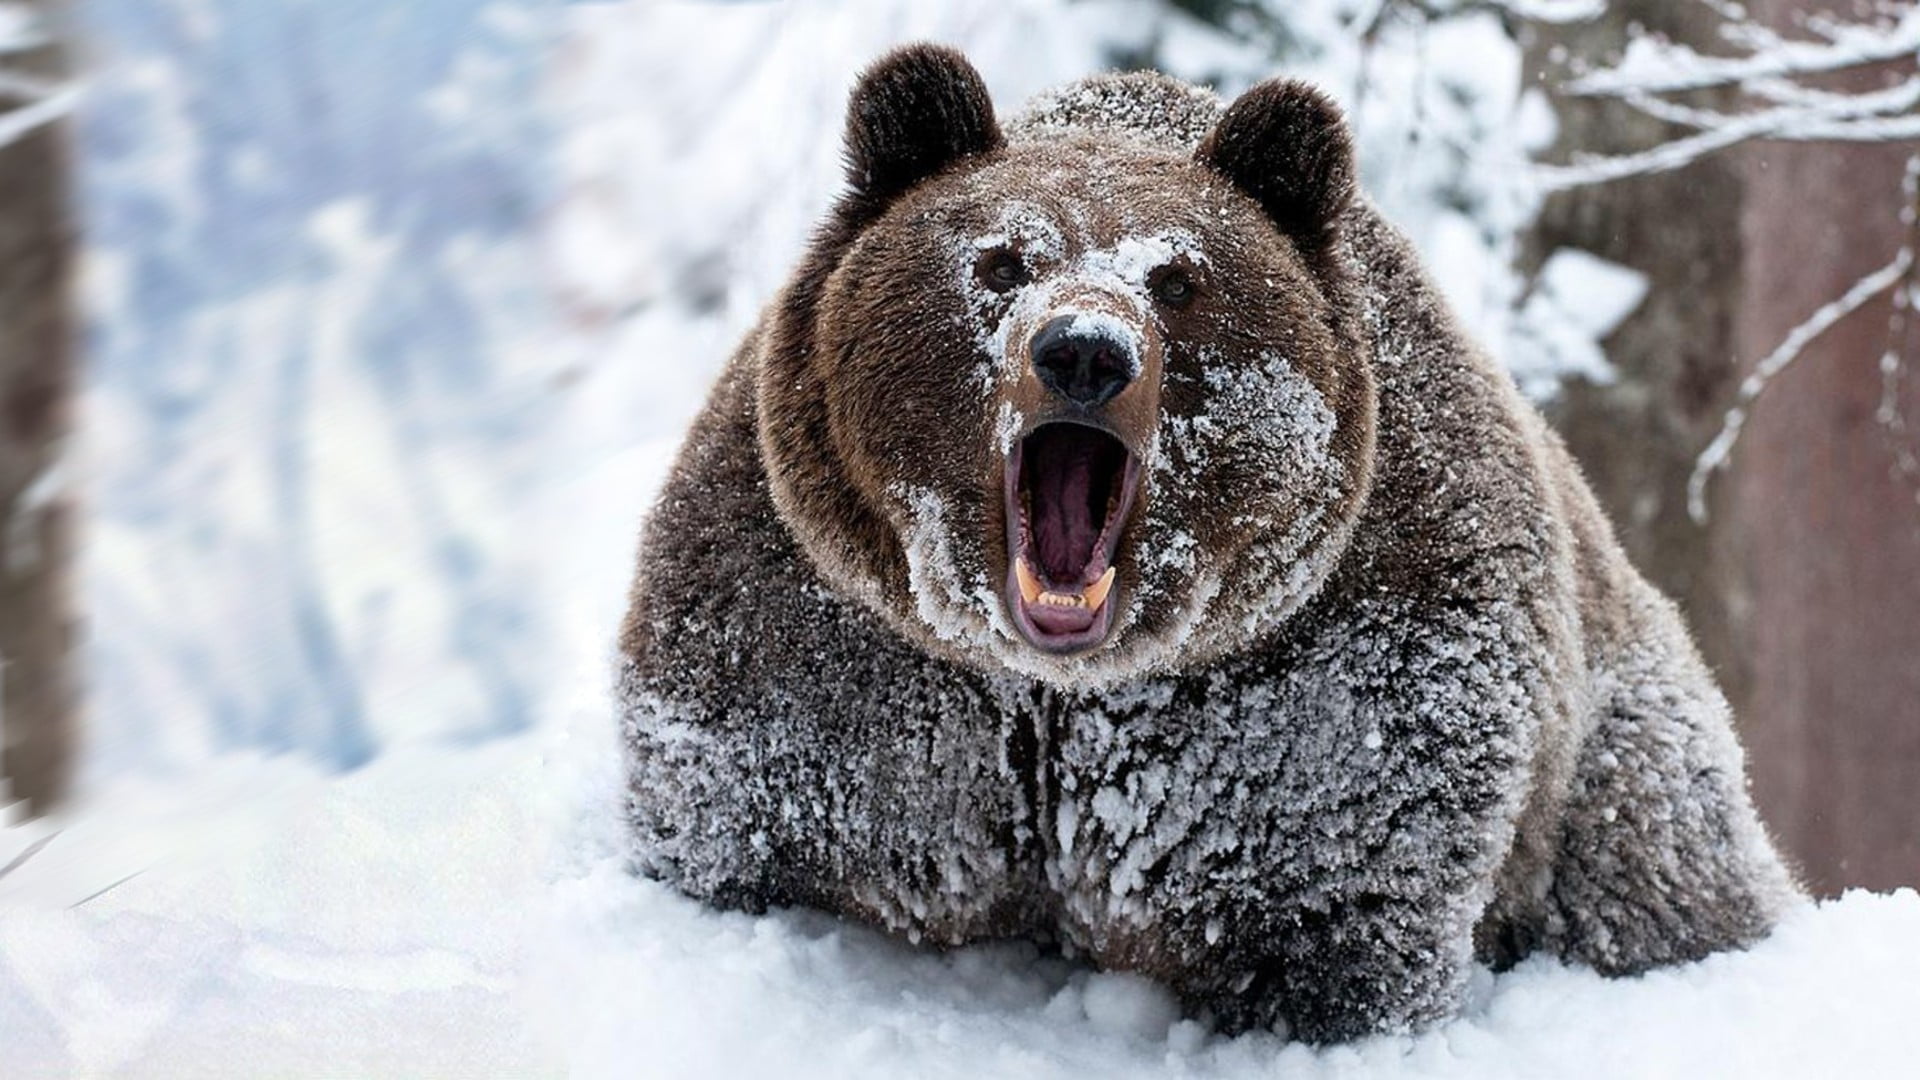 brown bear, snow, animals, bears, cold temperature, winter, animal themes